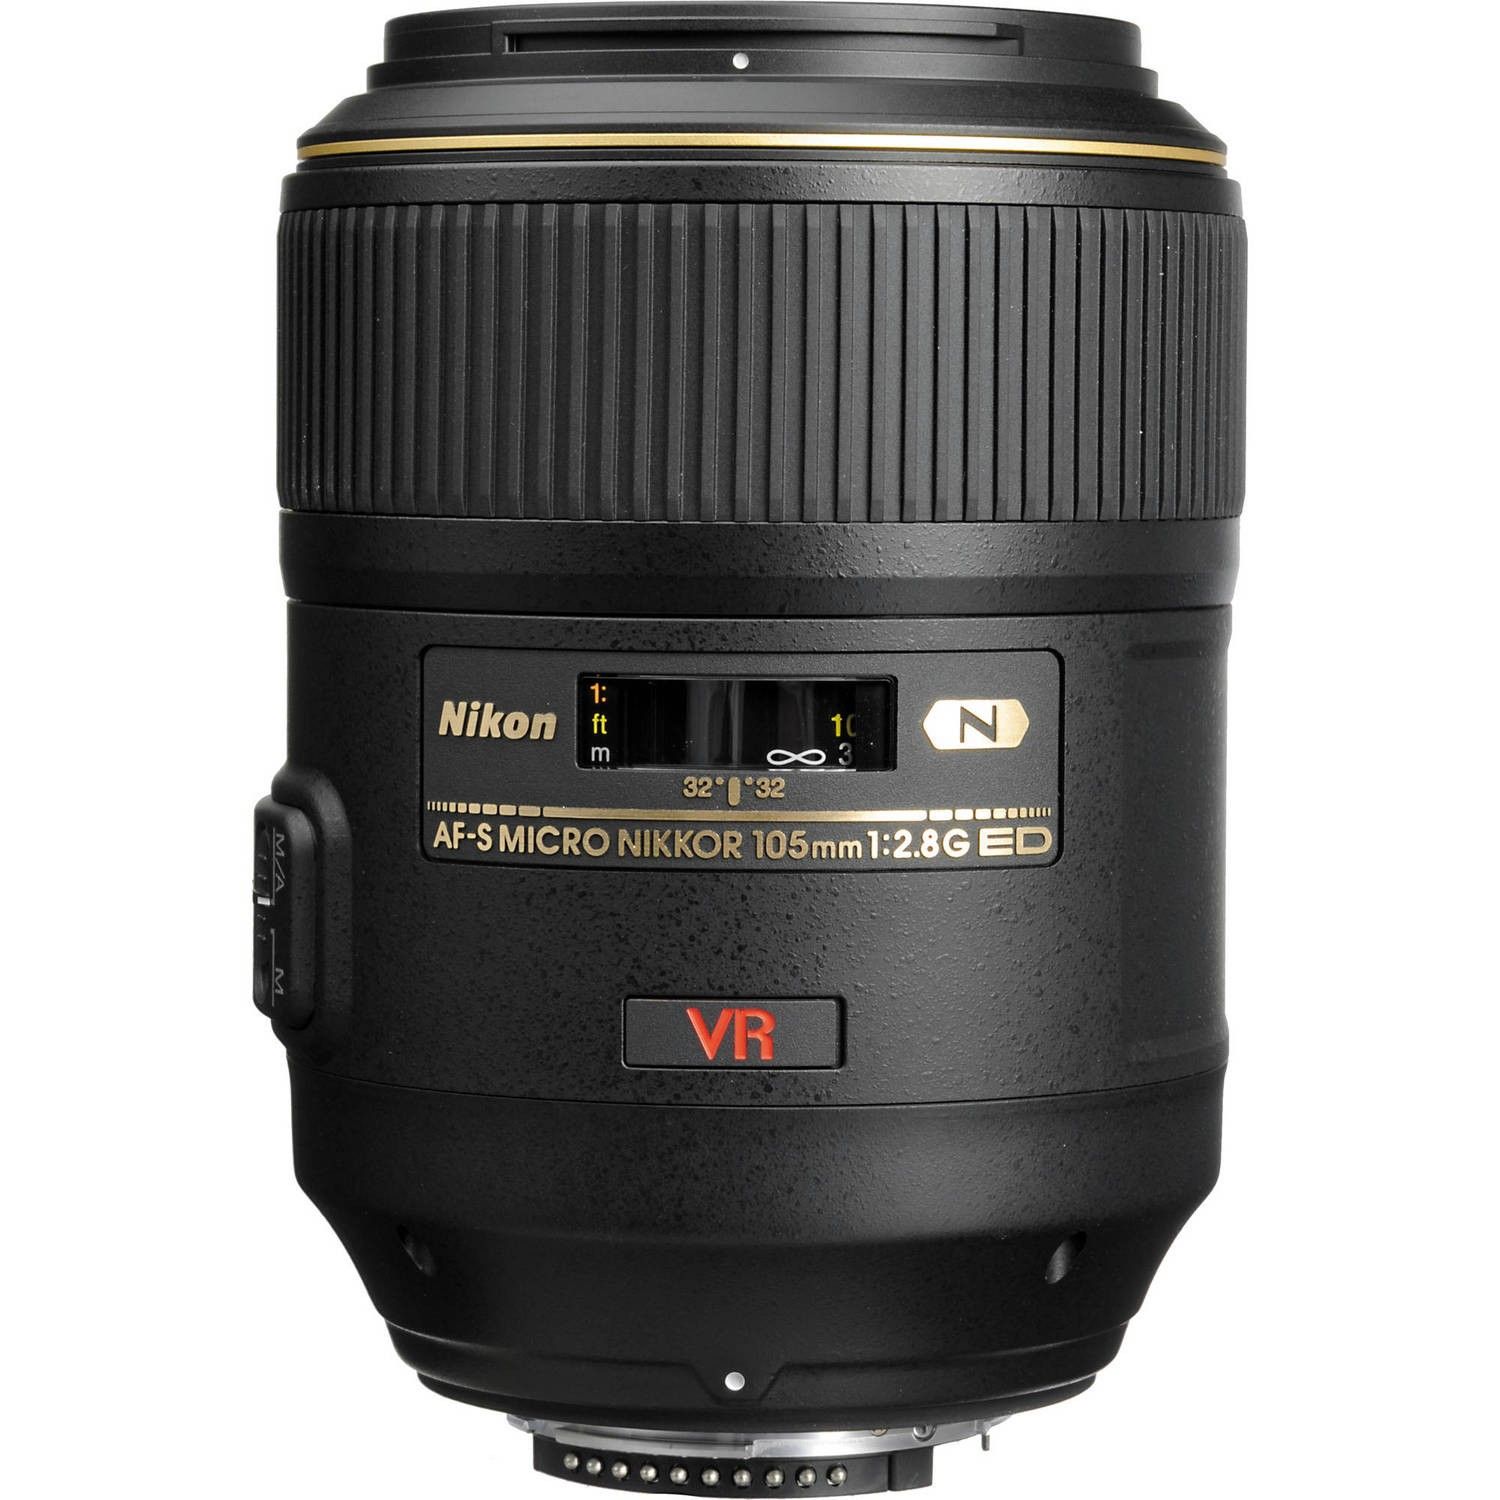 AF-S VR Micro 105mm f/2.8G IF ED